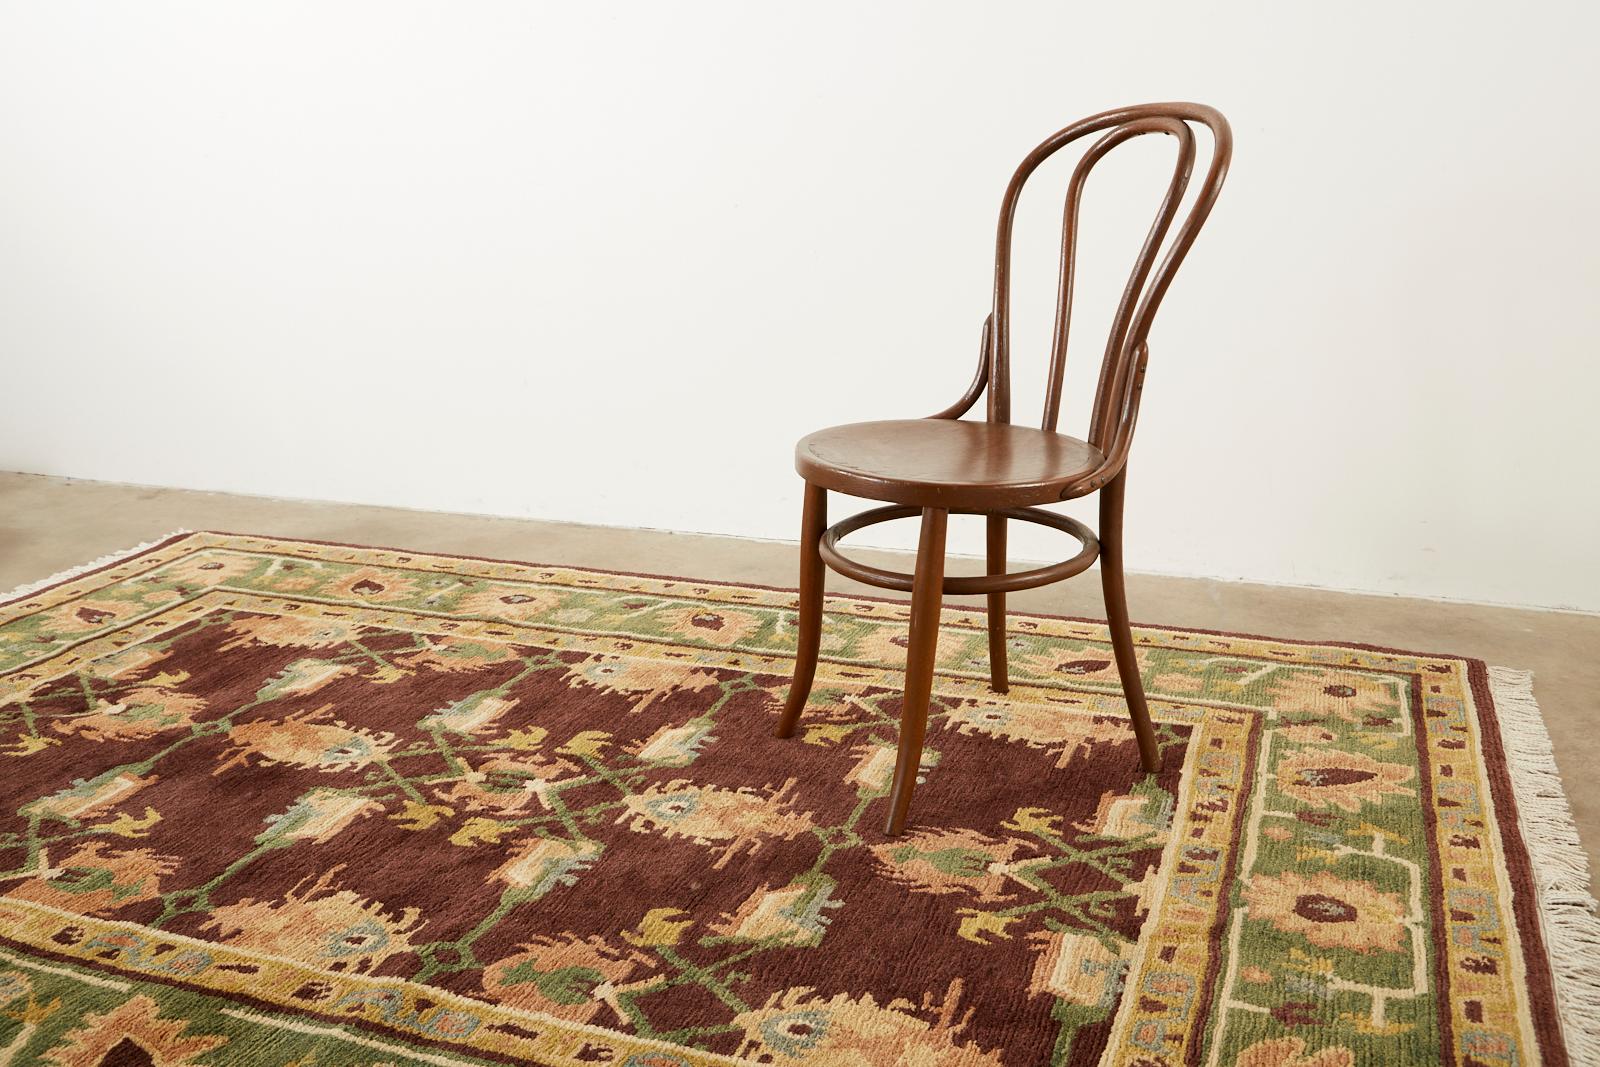 Unique wool rug from Nepal featuring an Arts & Crafts style design. Gorgeous brown field with a warm aubergine tone is bordered by a moss green border. Stylized palmettes and flowers decorate the entire rug with earth tone highlights in a William